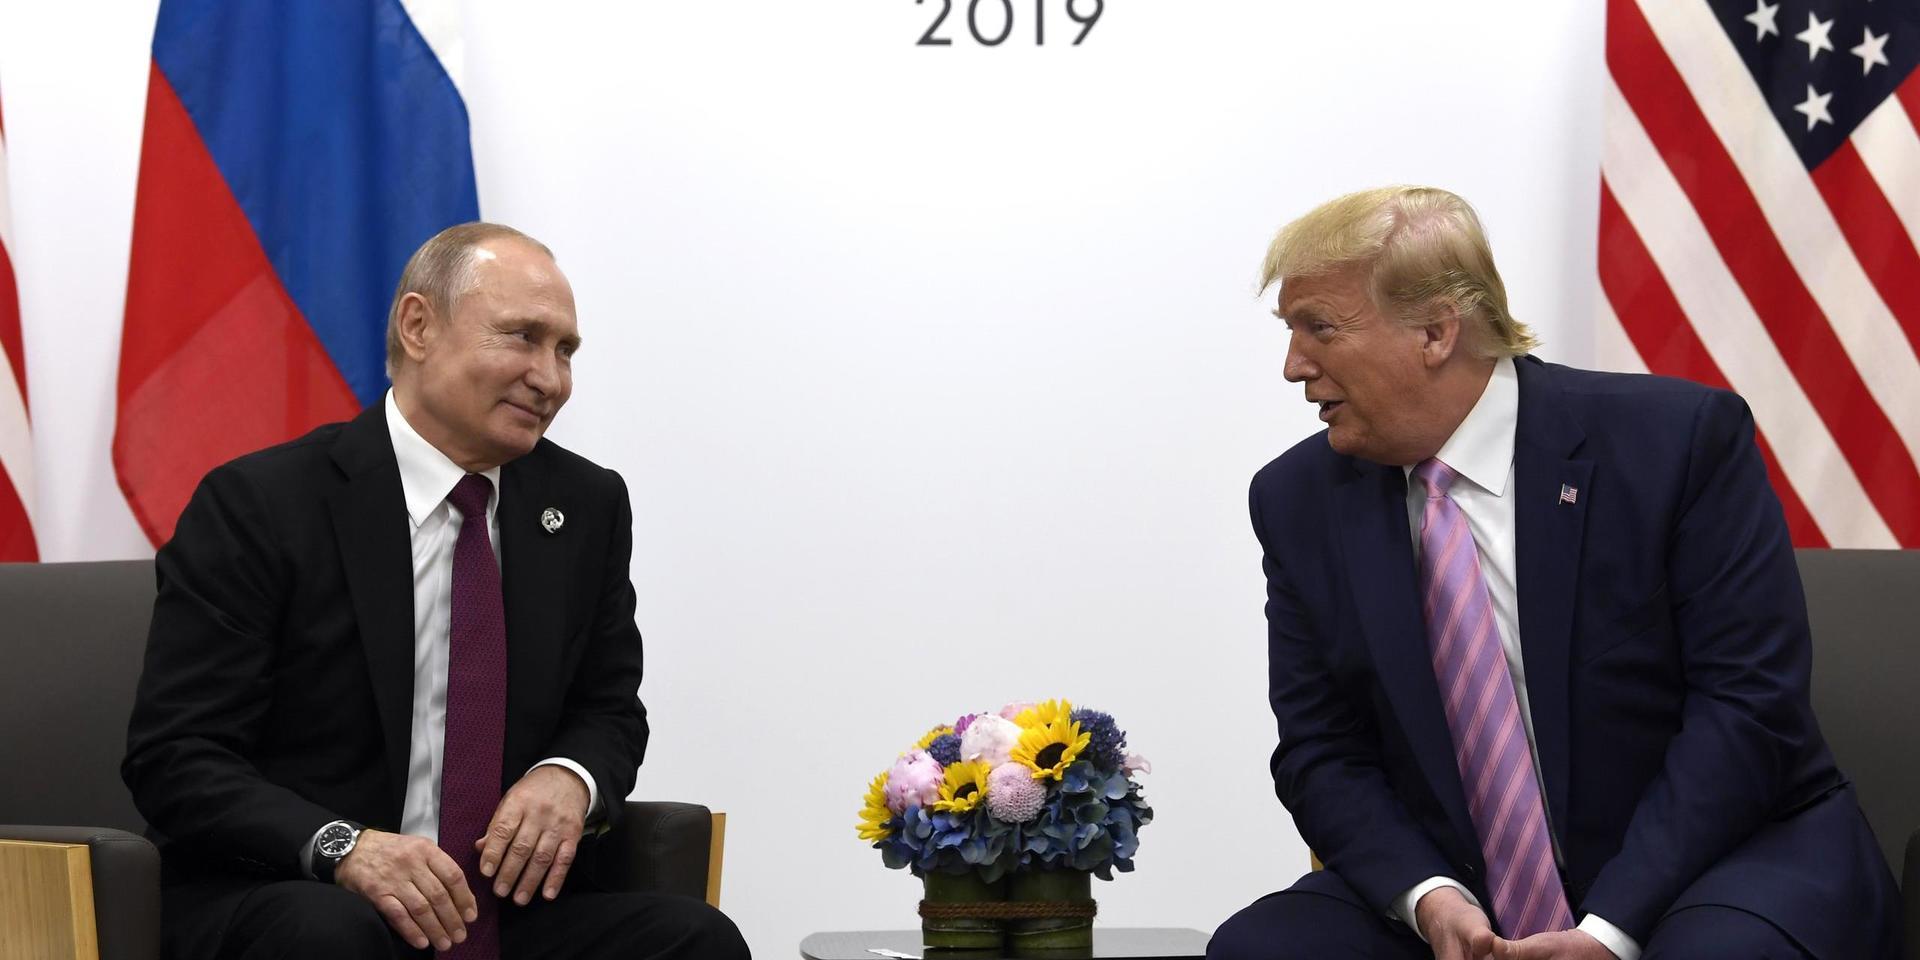 FILE - In this June 28, 2019, file photo, President Donald Trump, right, meets with Russian President Vladimir Putin during a bilateral meeting on the sidelines of the G-20 summit in Osaka, Japan. The U.S. and Russia have agreed to start arms control talks this month as the only remaining treaty between the two largest nuclear powers is poised to expire in less than a year, Marshall Billingslea, the president’s special envoy for arms control, said Monday, June 8, 2020.